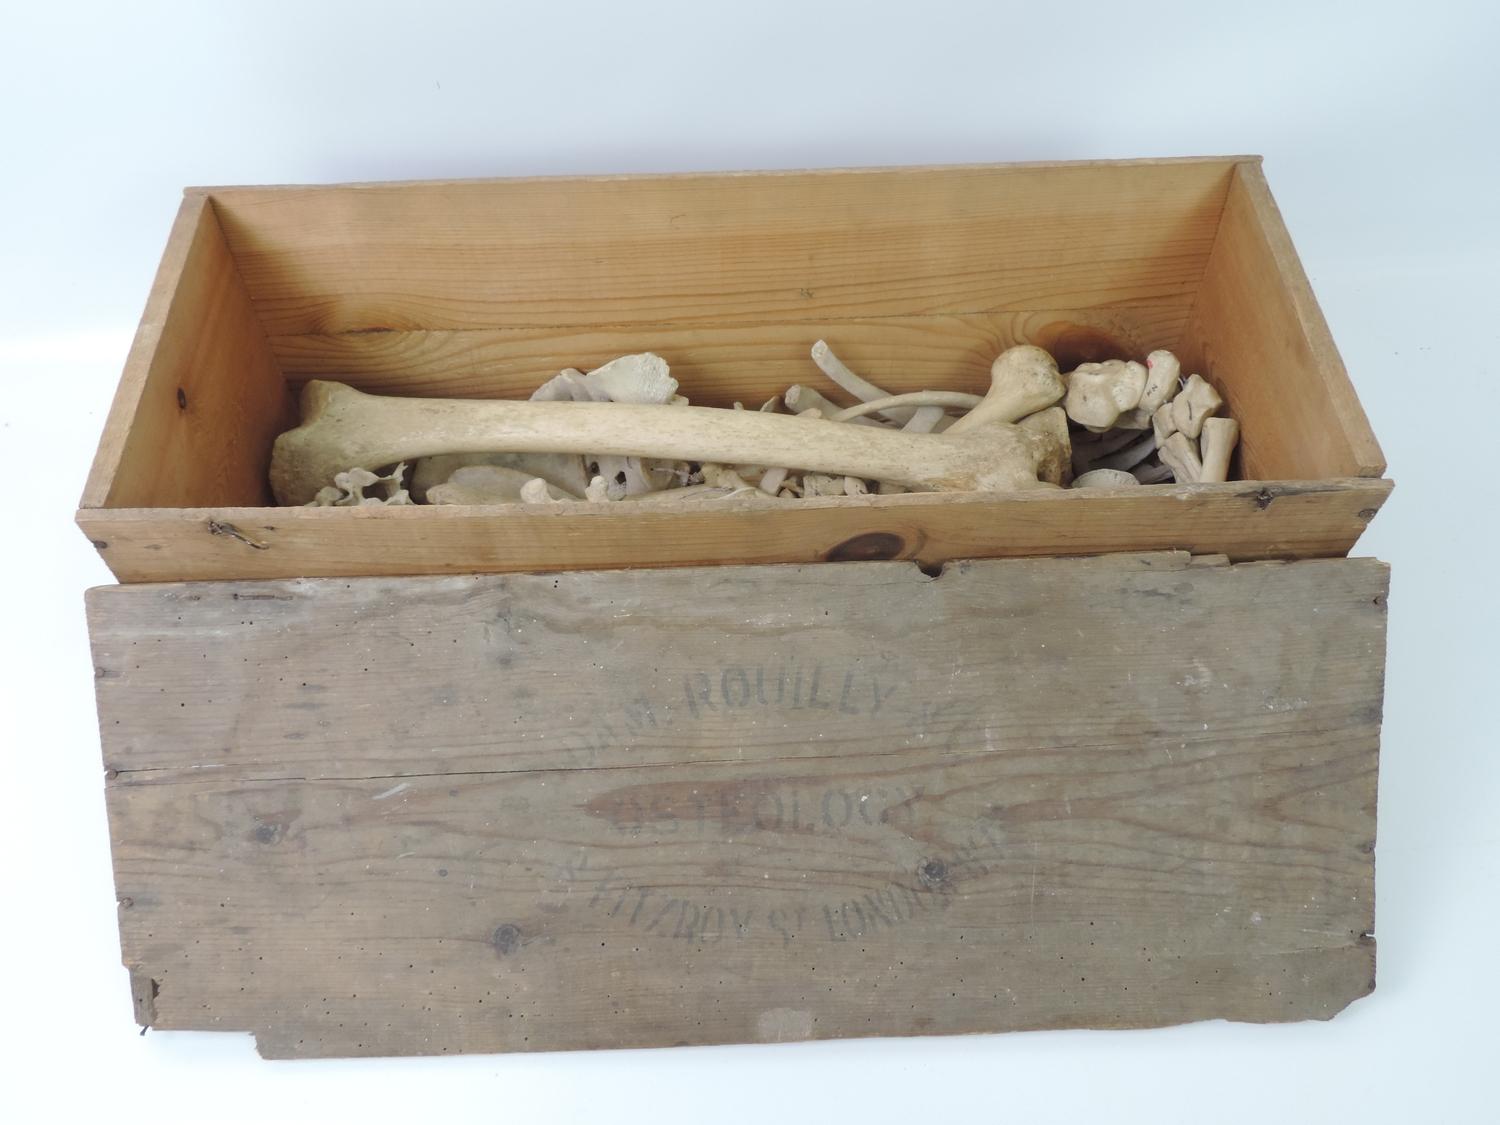 Wooden Box and Contents - Part Human Skeleton